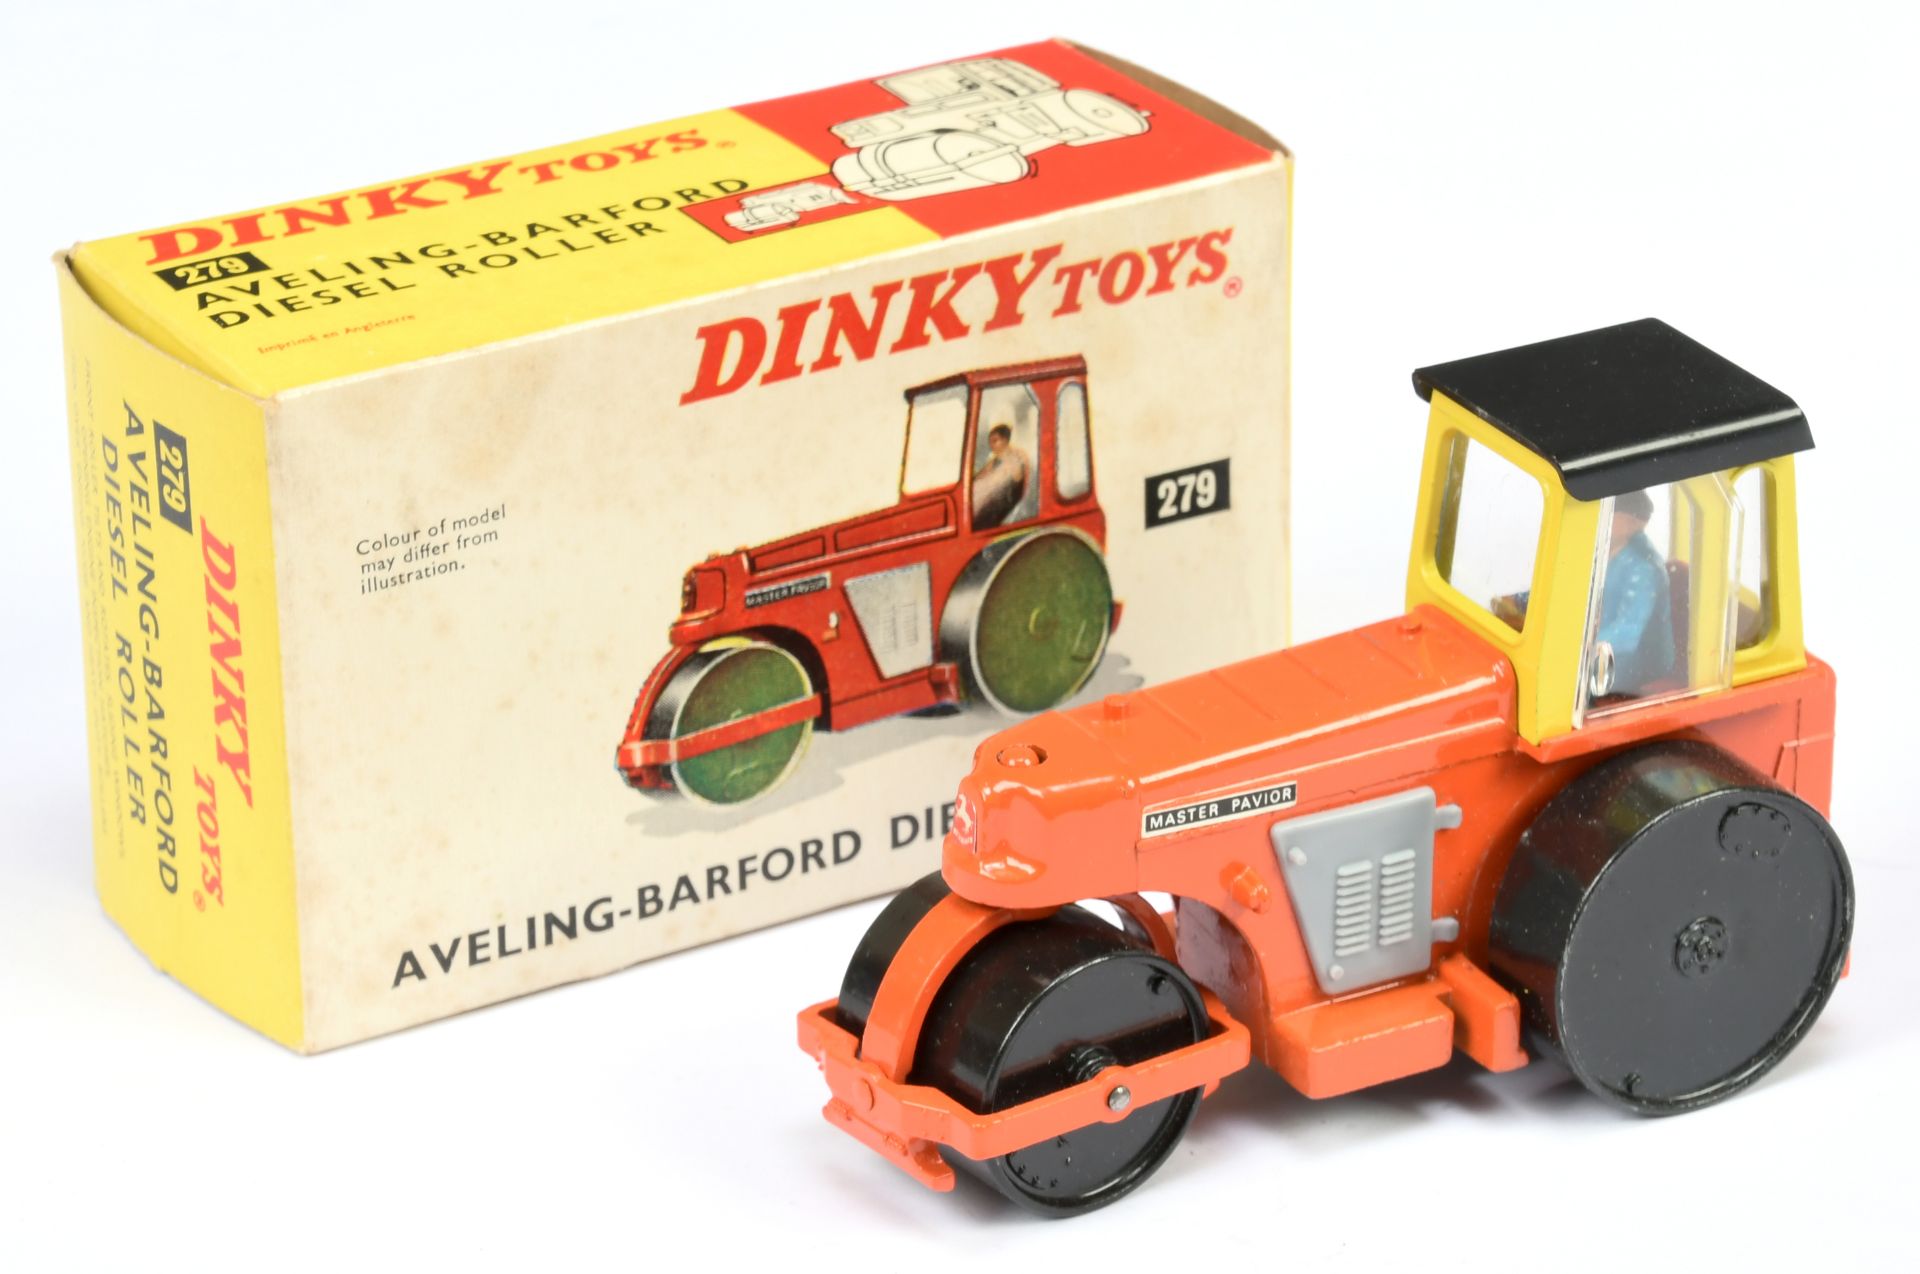 Dinky Toys 279 Aveling Barford Diesel Roller - orange body yellow cab with black roof, grey plast...